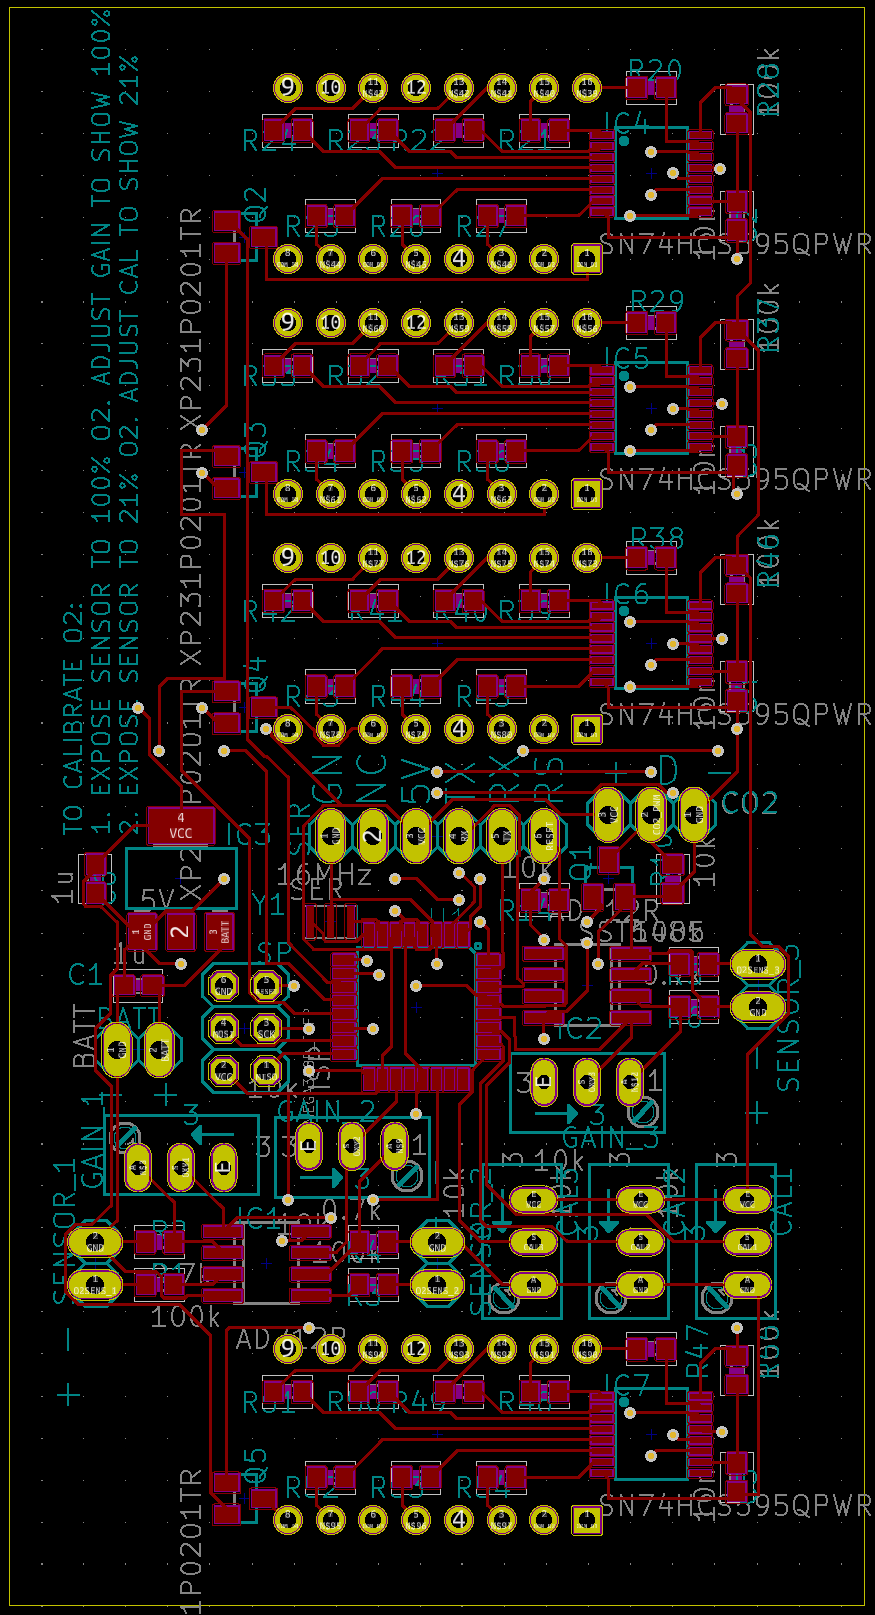 The layout of the front side of the board